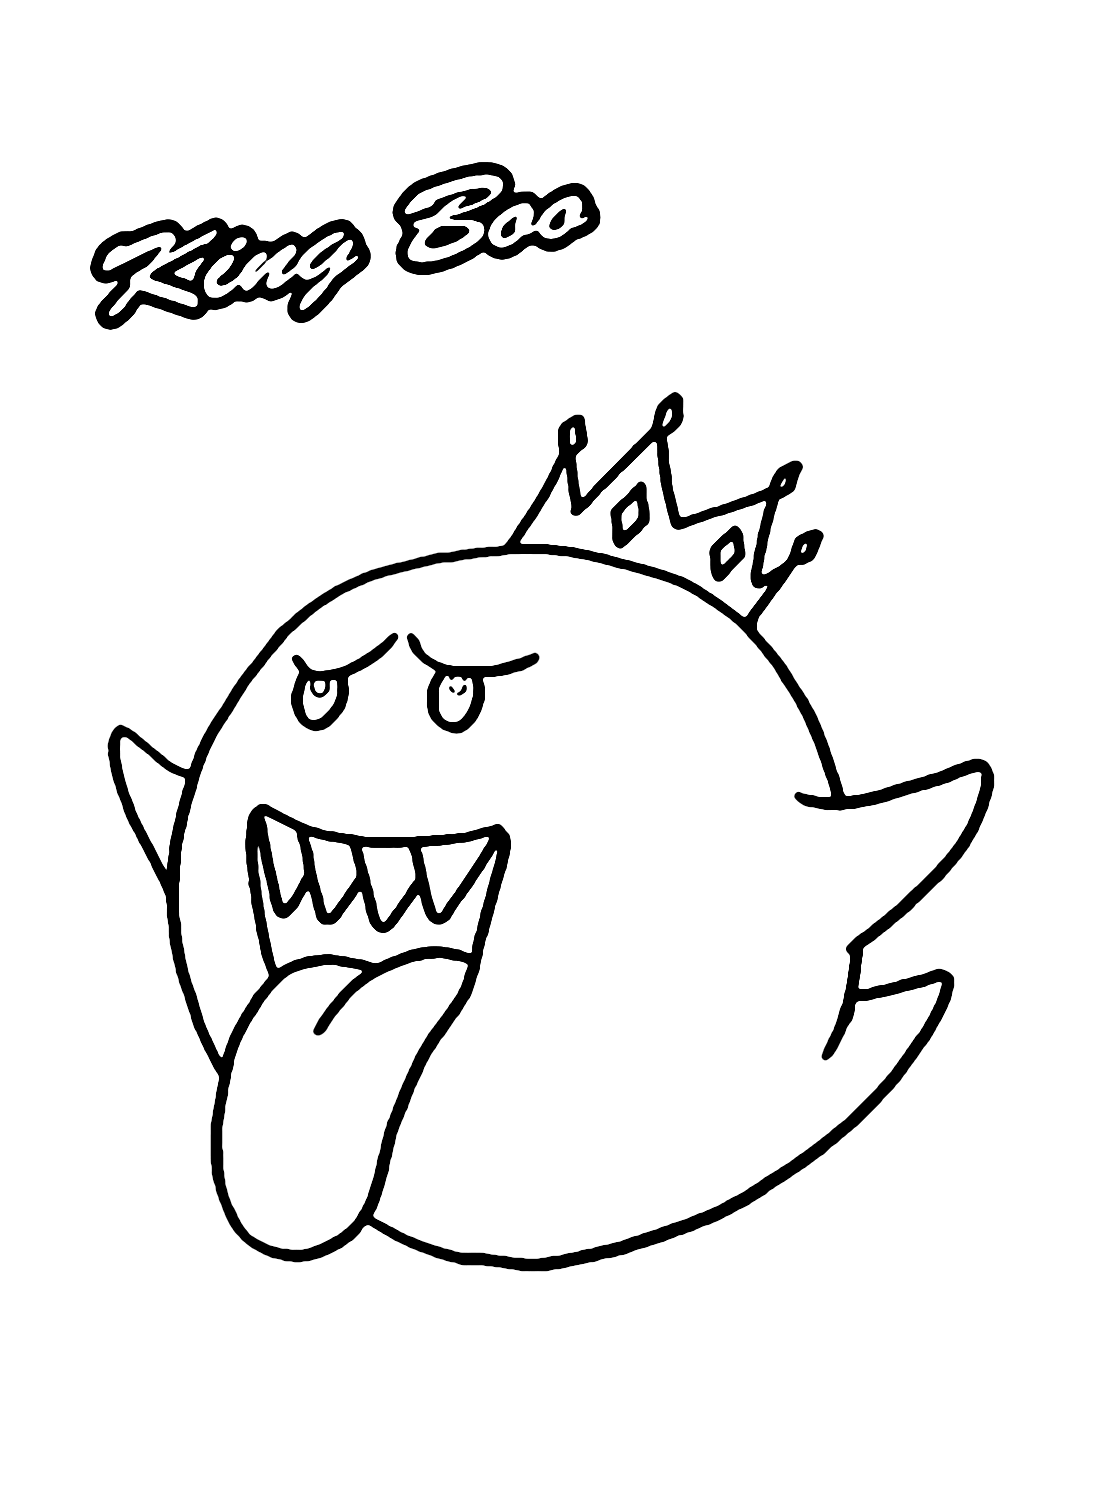 King Boo Pictures Coloring Page